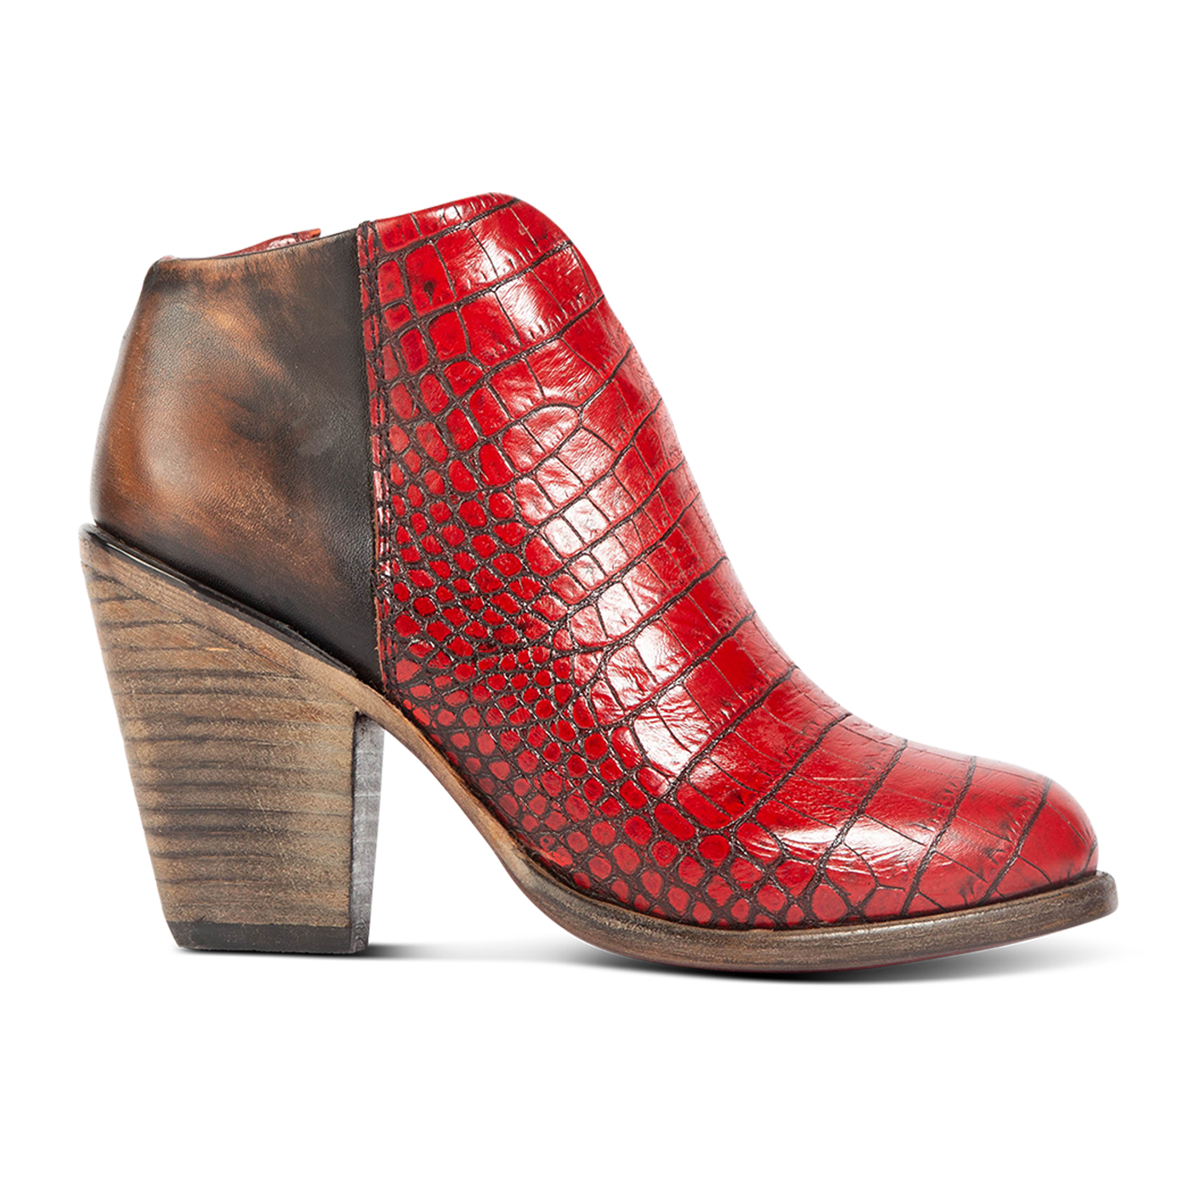 FREEBIRD women's Detroit red croco featuring inverted heel, front cut out dip, and two toned full grain leather